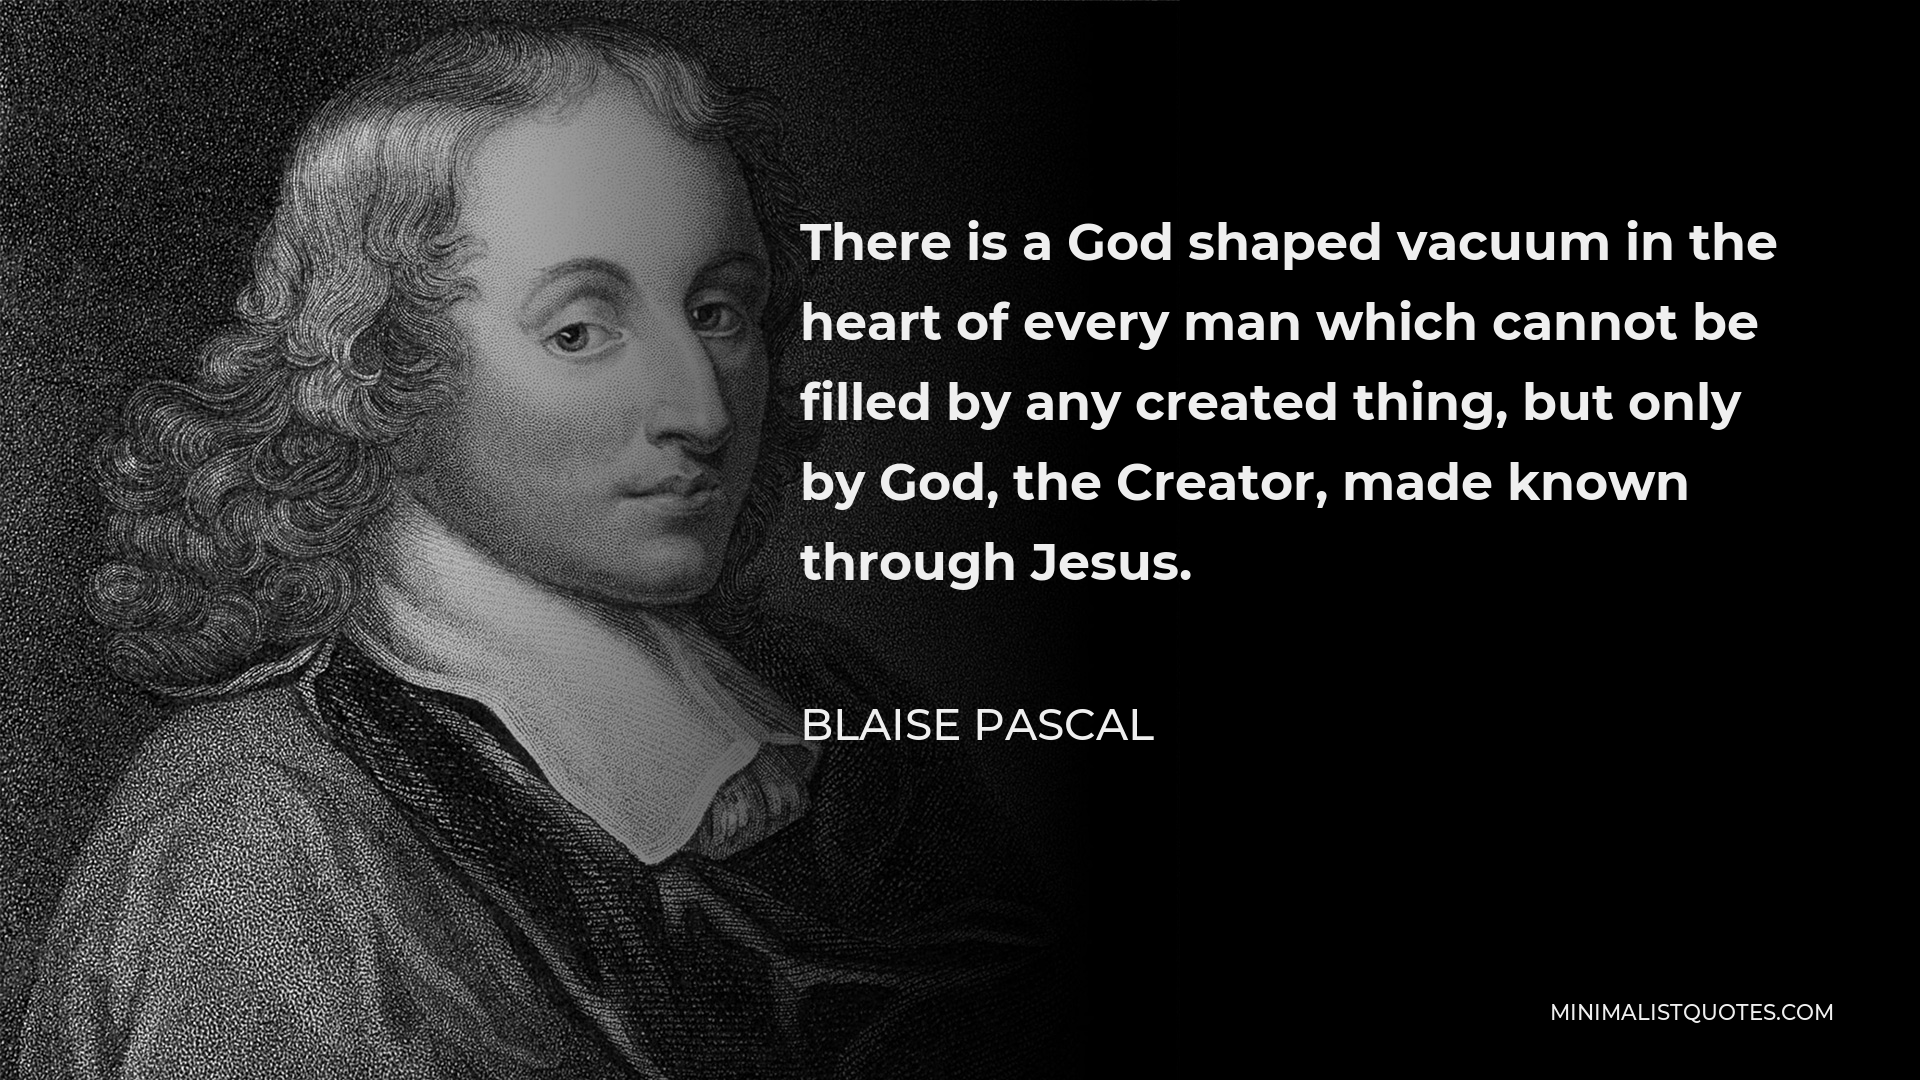 Blaise Pascal Quote - There is a God shaped vacuum in the heart of every man which cannot be filled by any created thing, but only by God, the Creator, made known through Jesus.